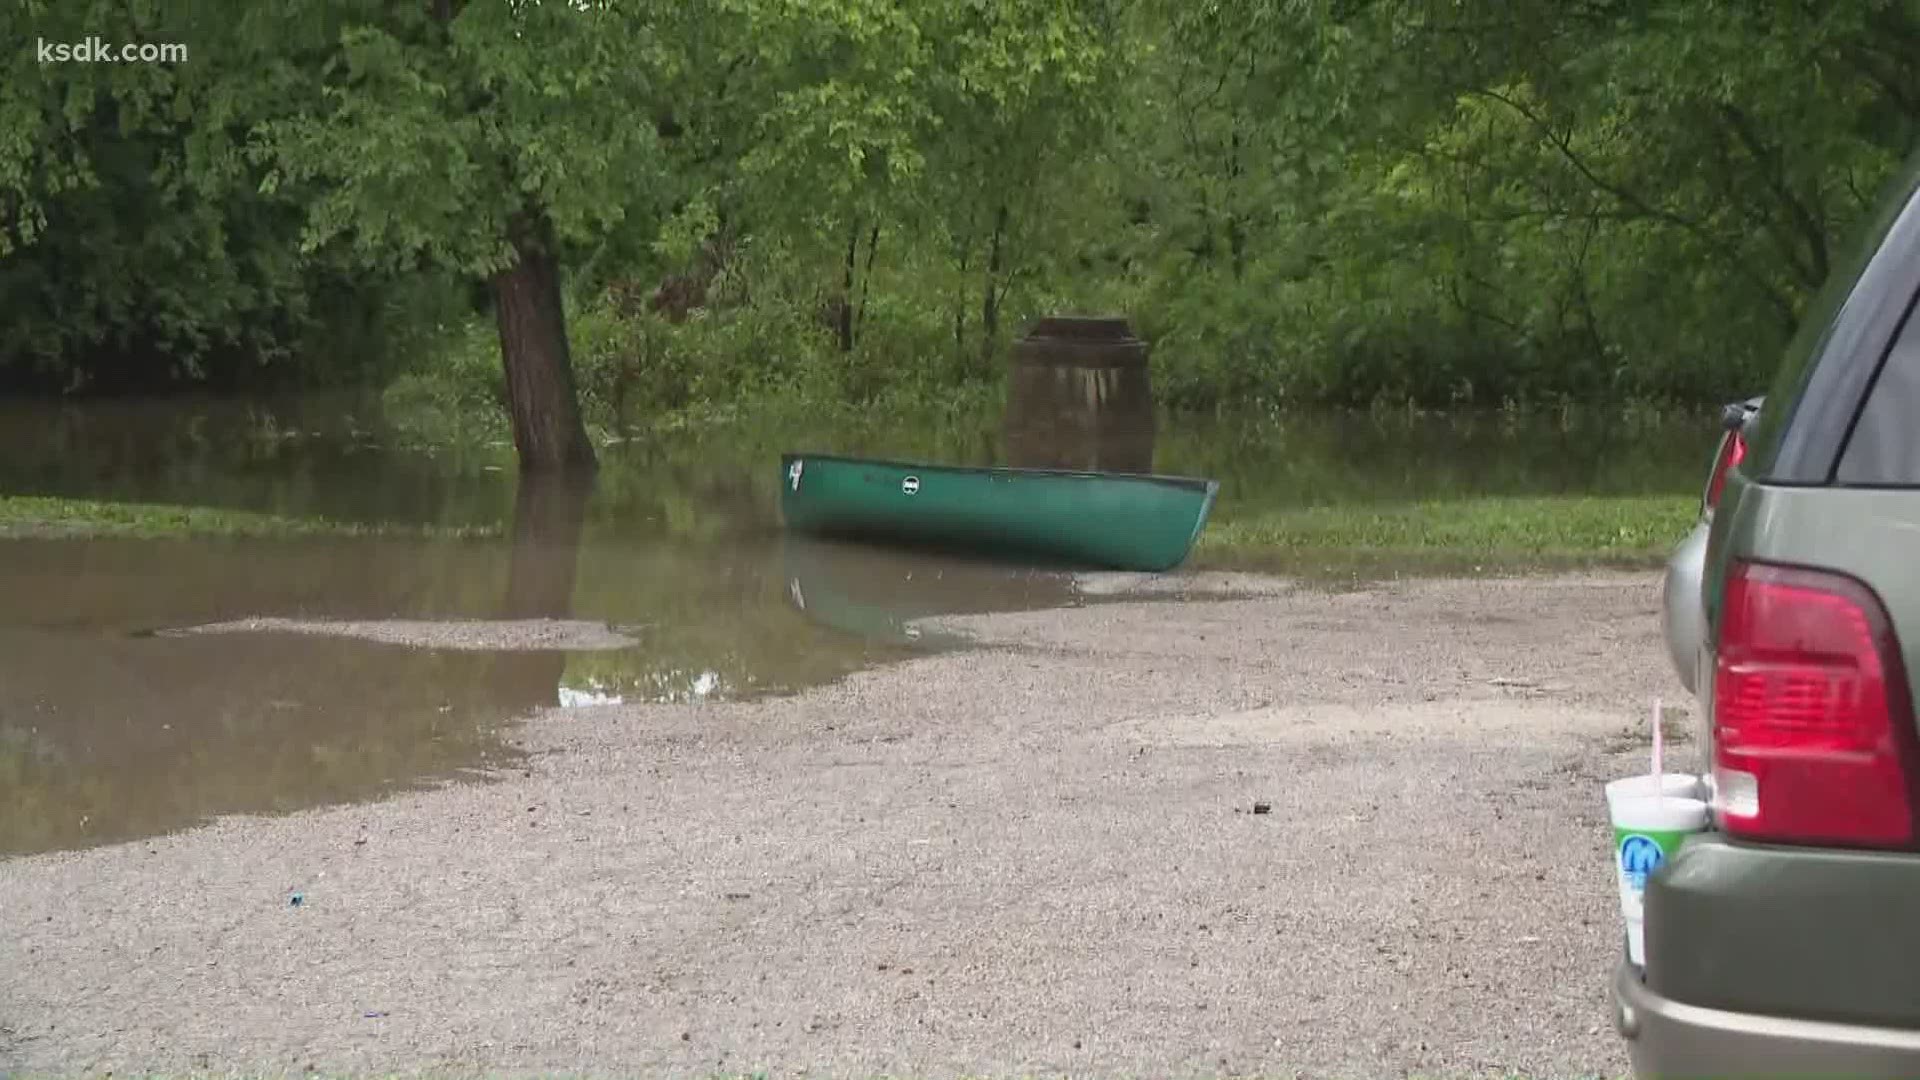 Residents said they had to use a boat to escape the waist-deep water.